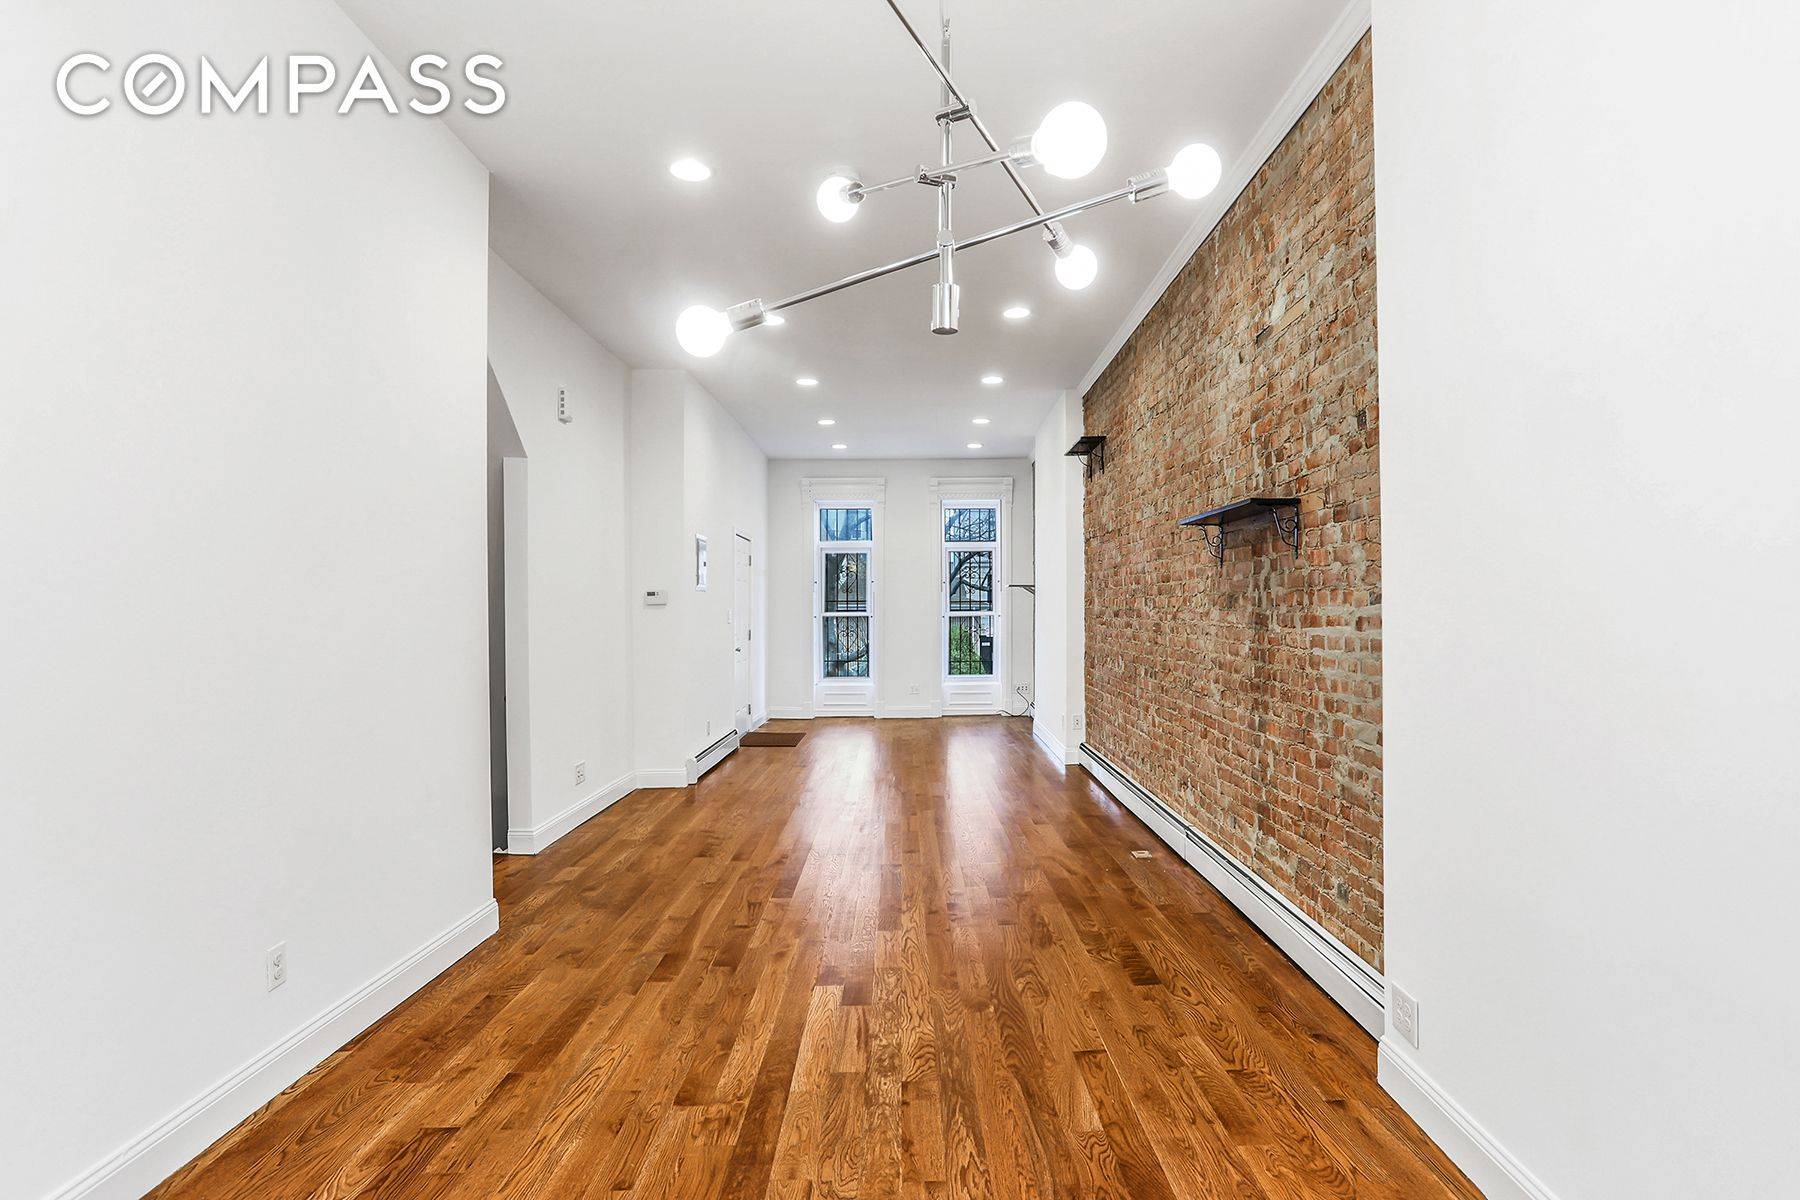 VERY SPECIAL Triplex in Prime Bedstuy Location with Private Garden and Maker space finished basement Built with LOVE Two Bedroom with Home Office currently being used as a three bedroom ...